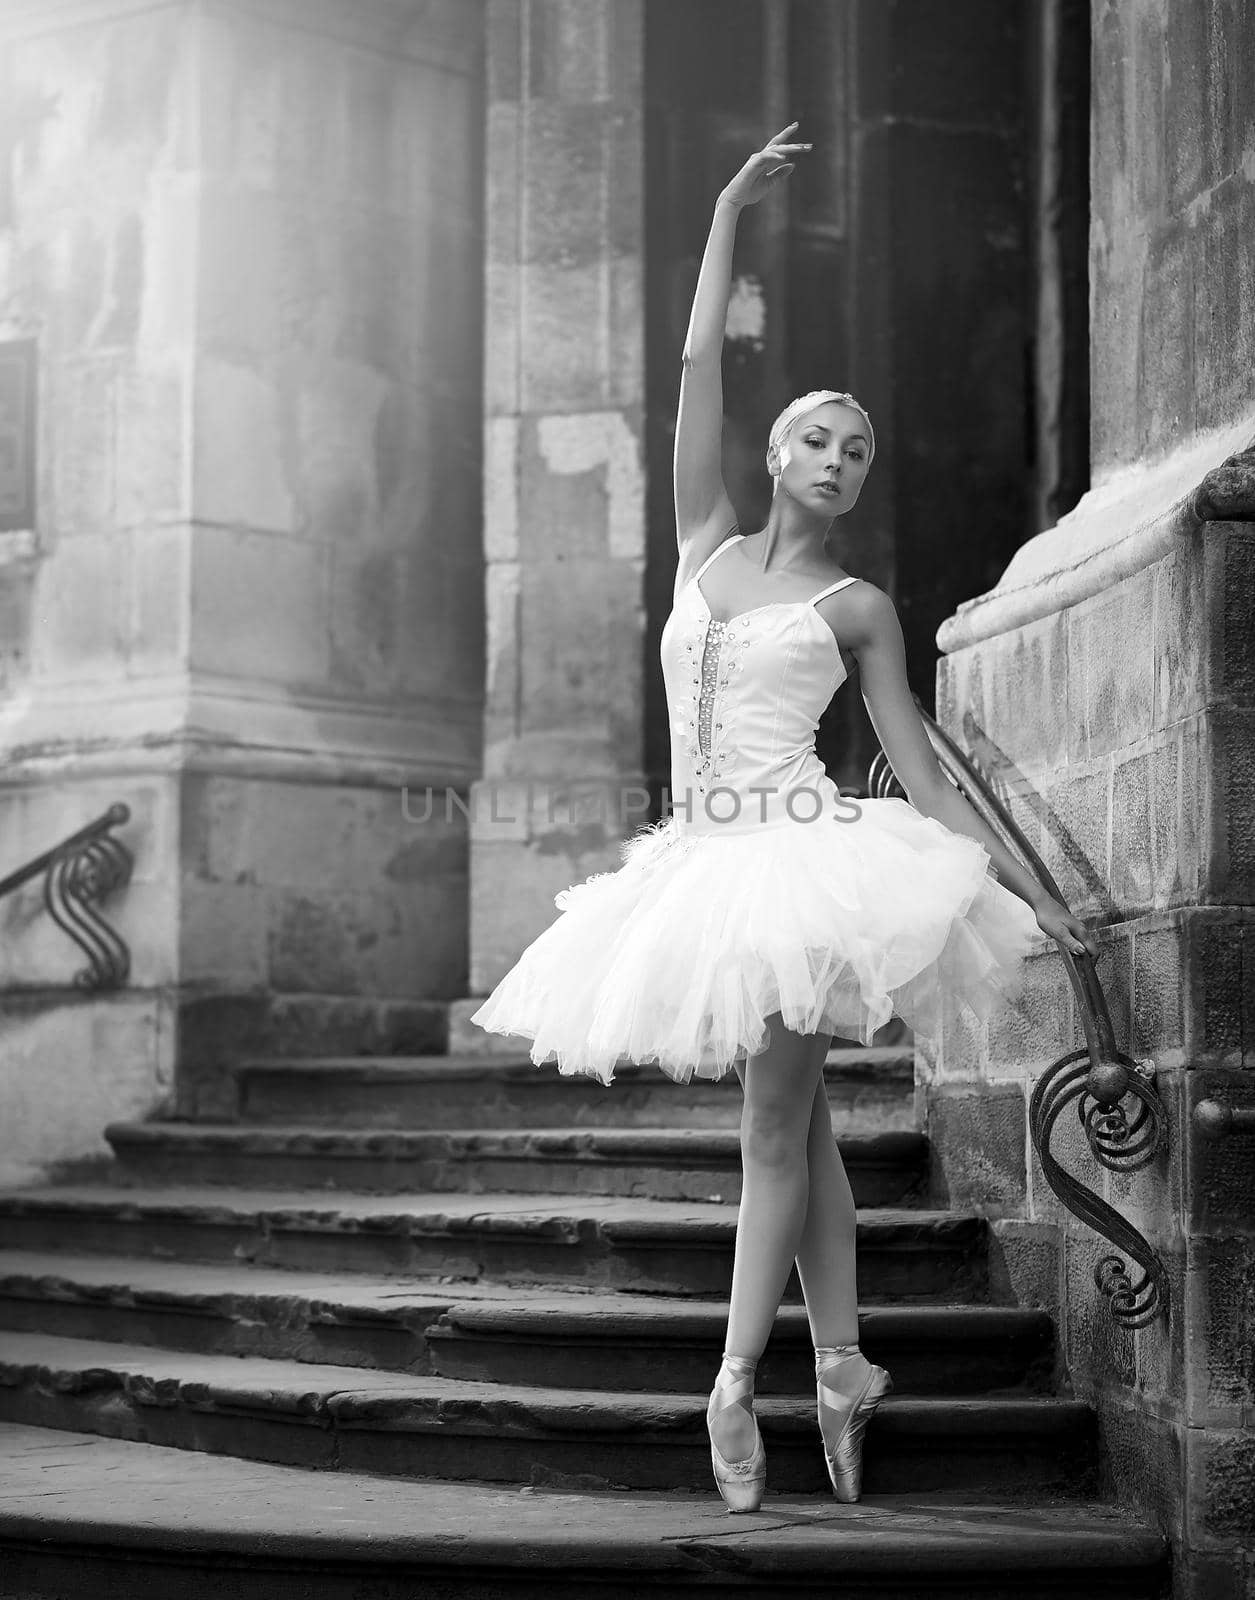 She is a living art. Vertical monochrome shot of a beautiful ballerina standing in ballet pose on stairs of an old castle soft focus